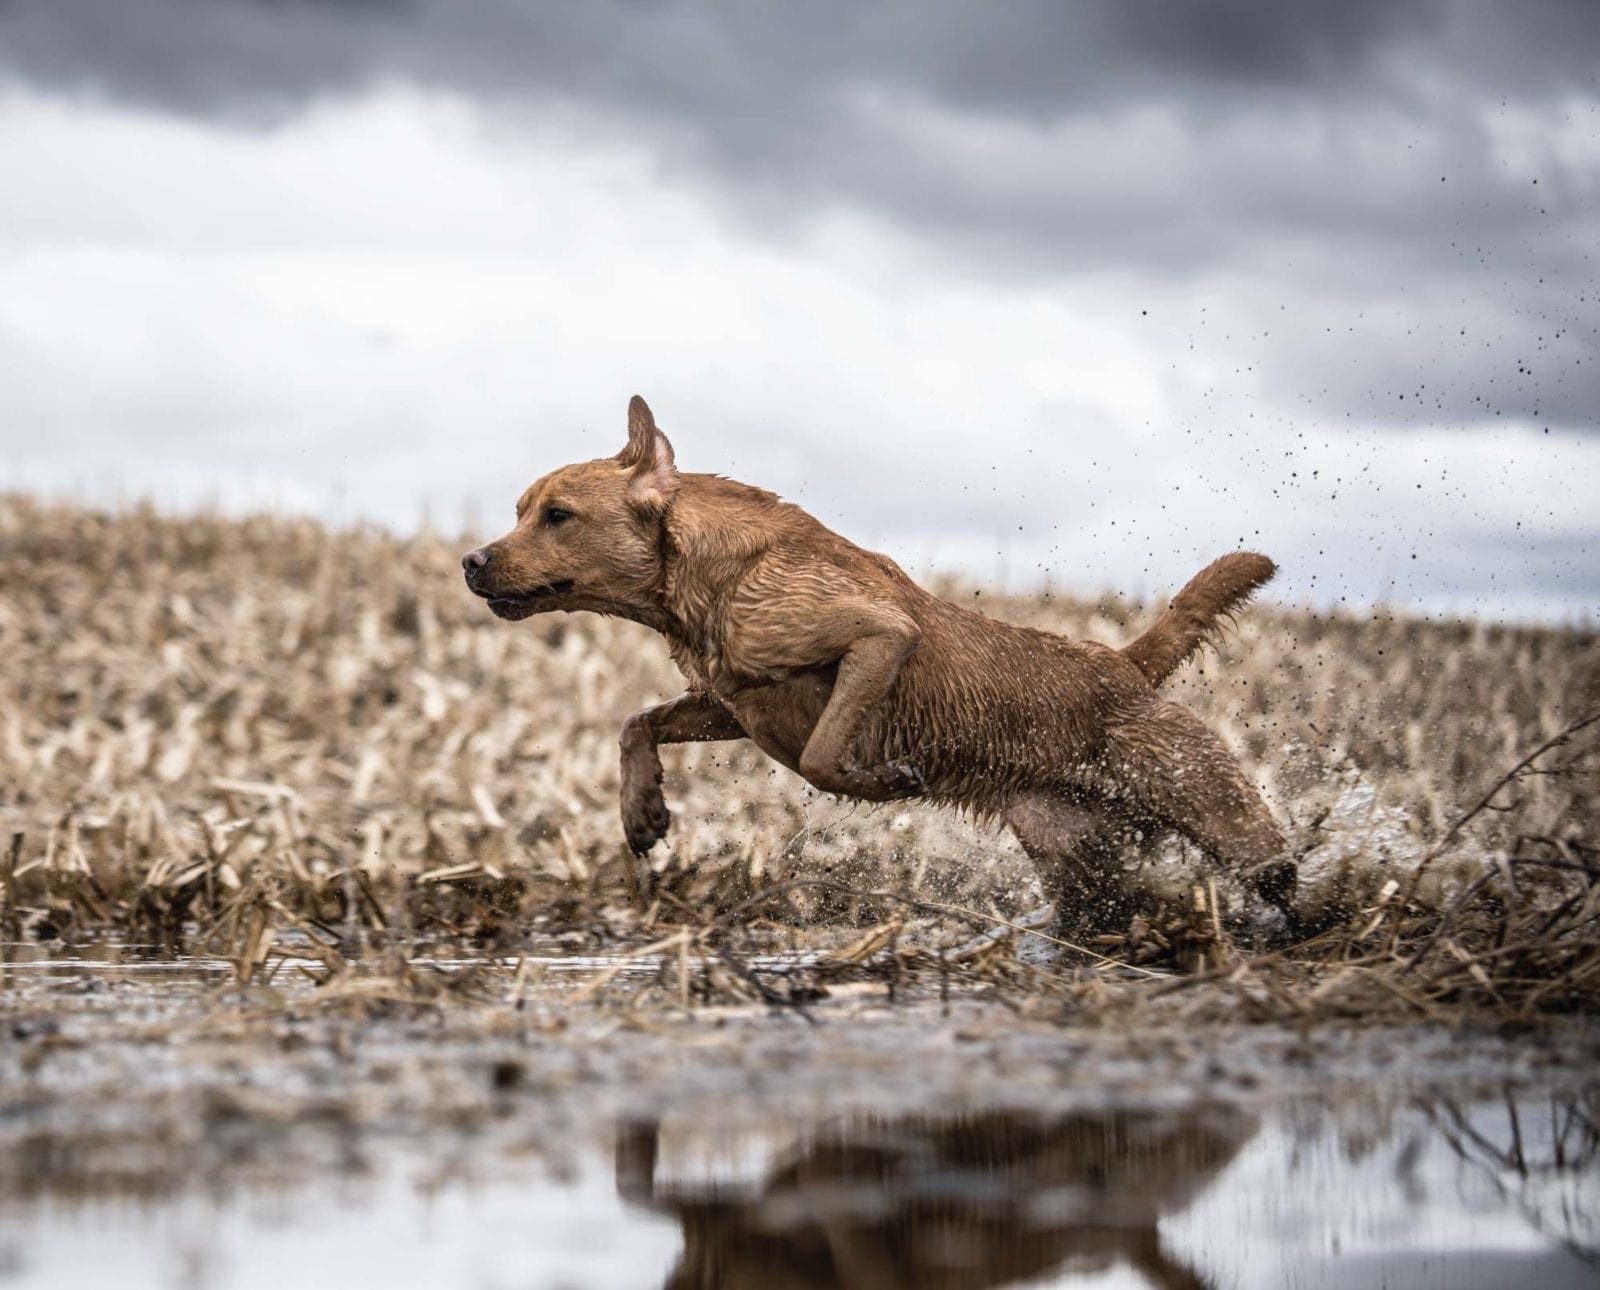 A British lab jumping into water